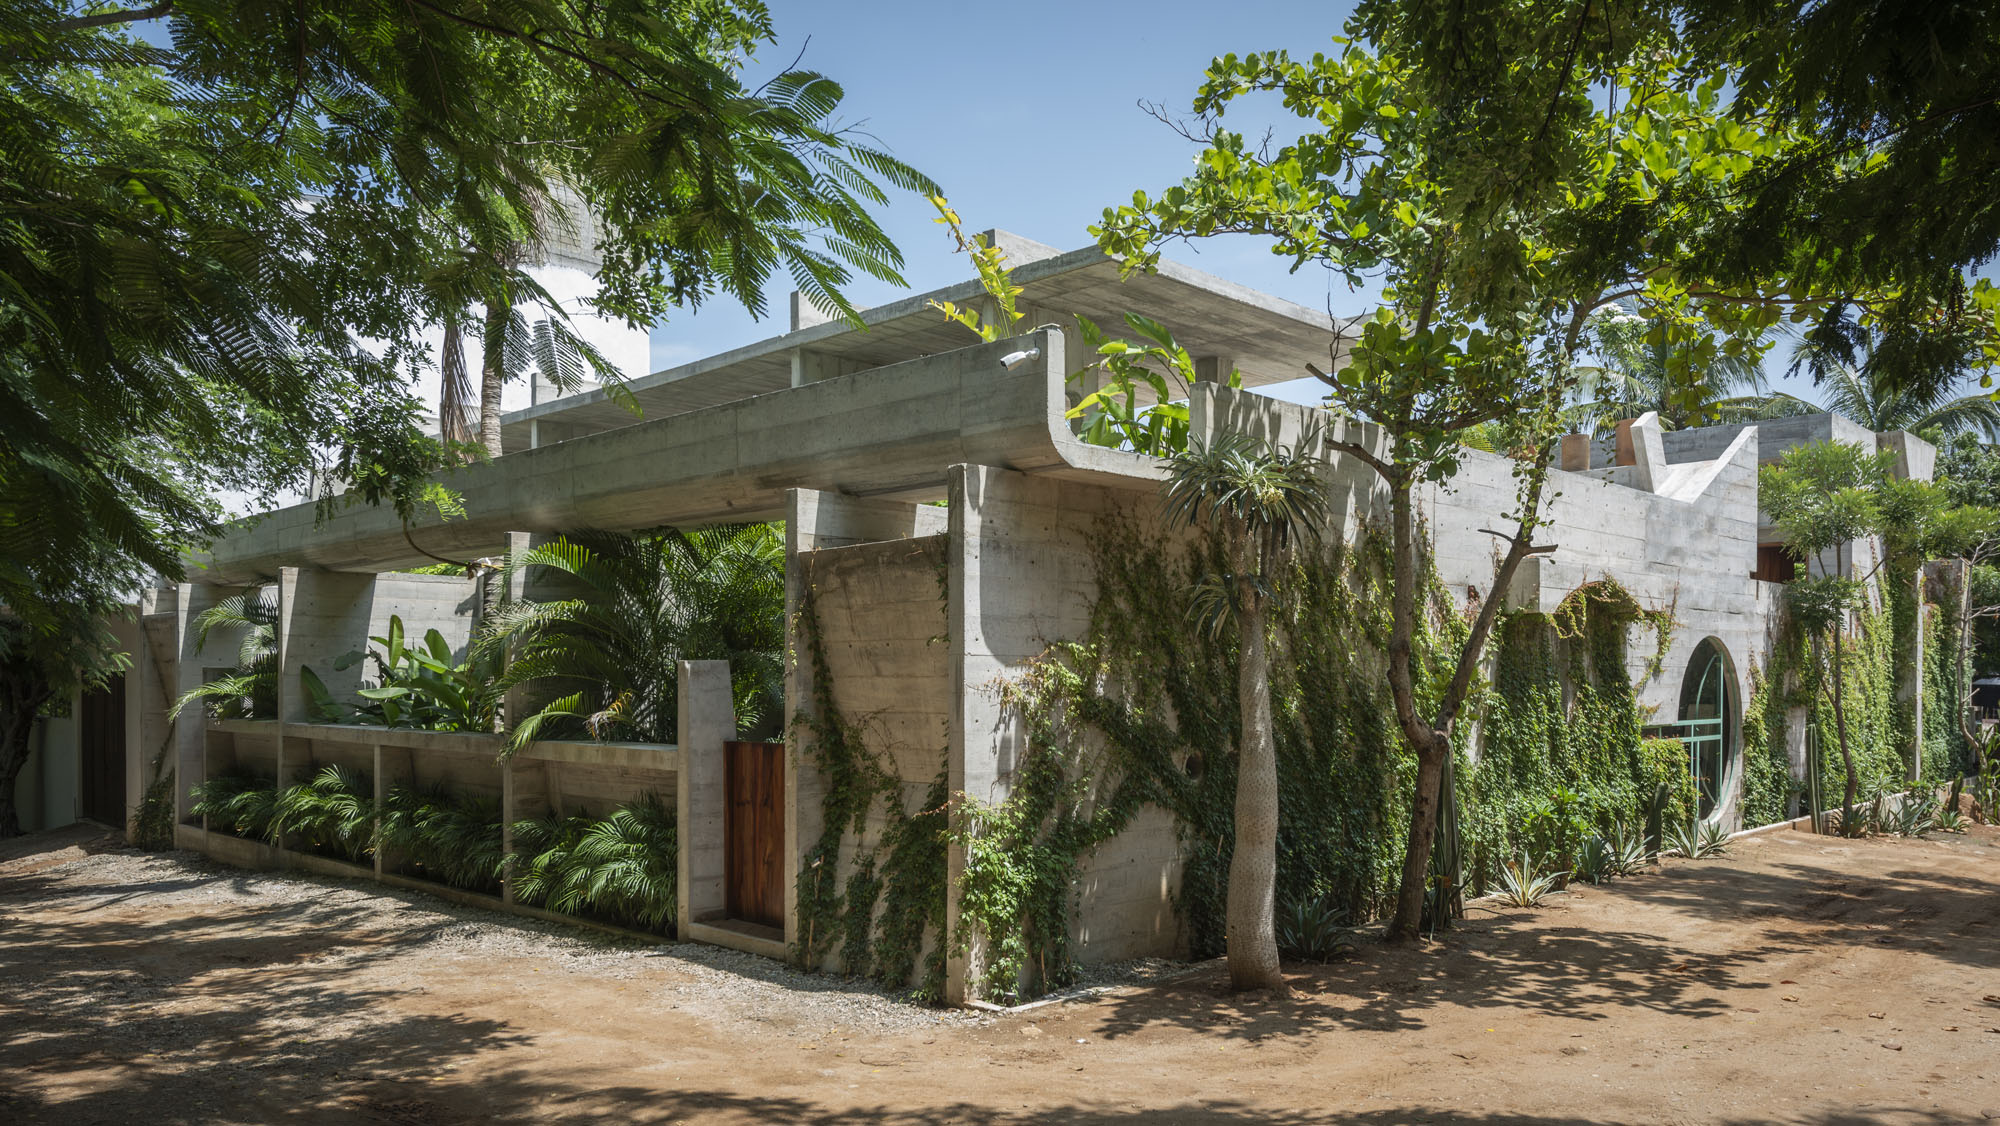 Exterior view of a concrete building nestled among lush tropical foliage